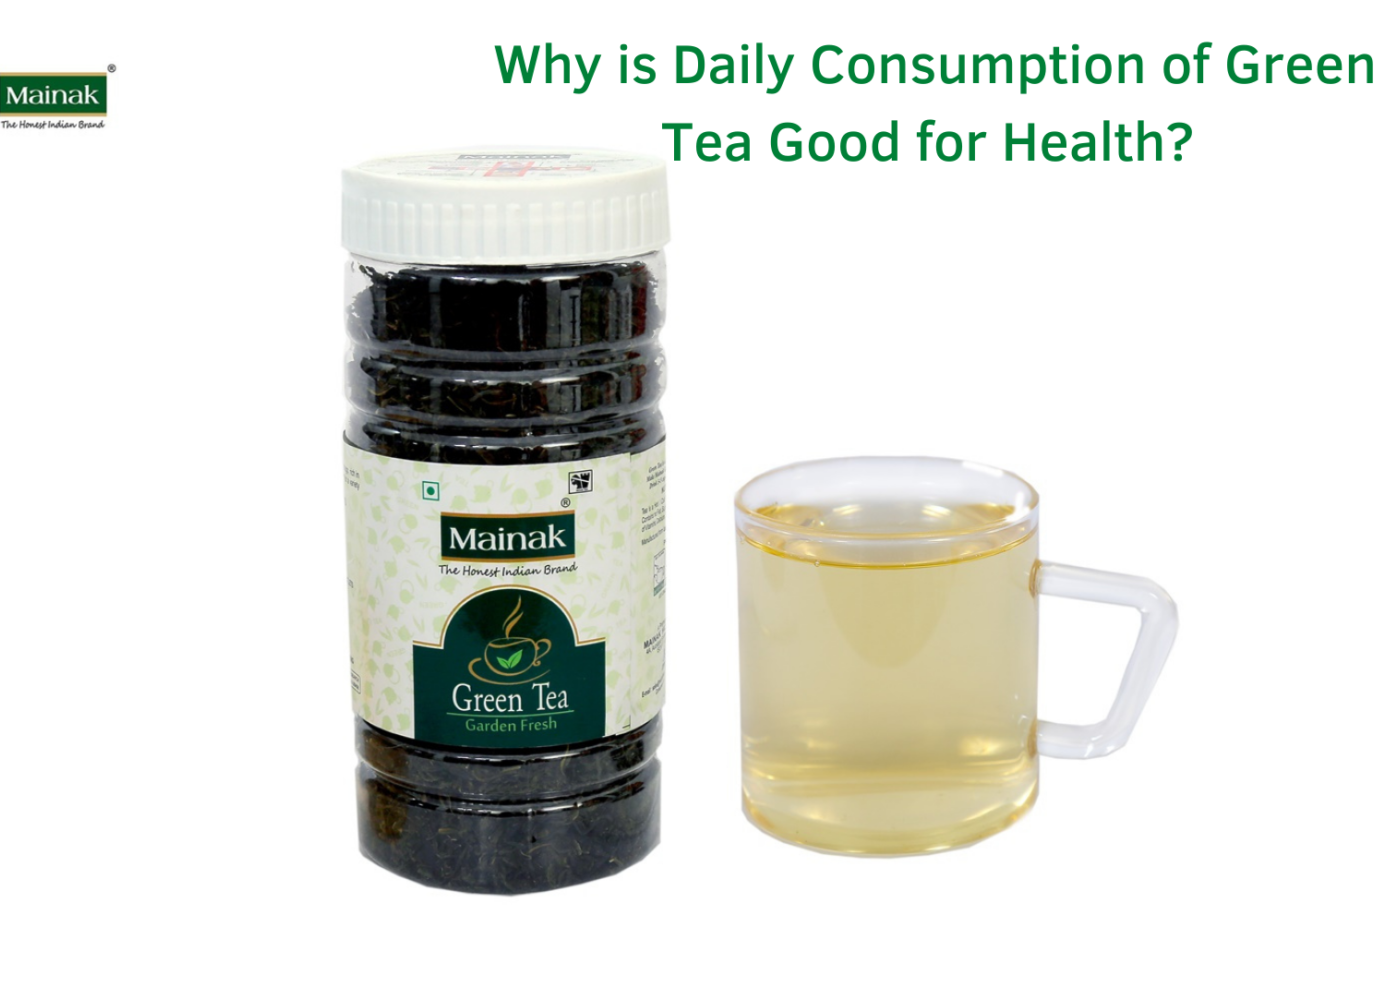 Why is Daily Consumption of Green Tea Good for Health